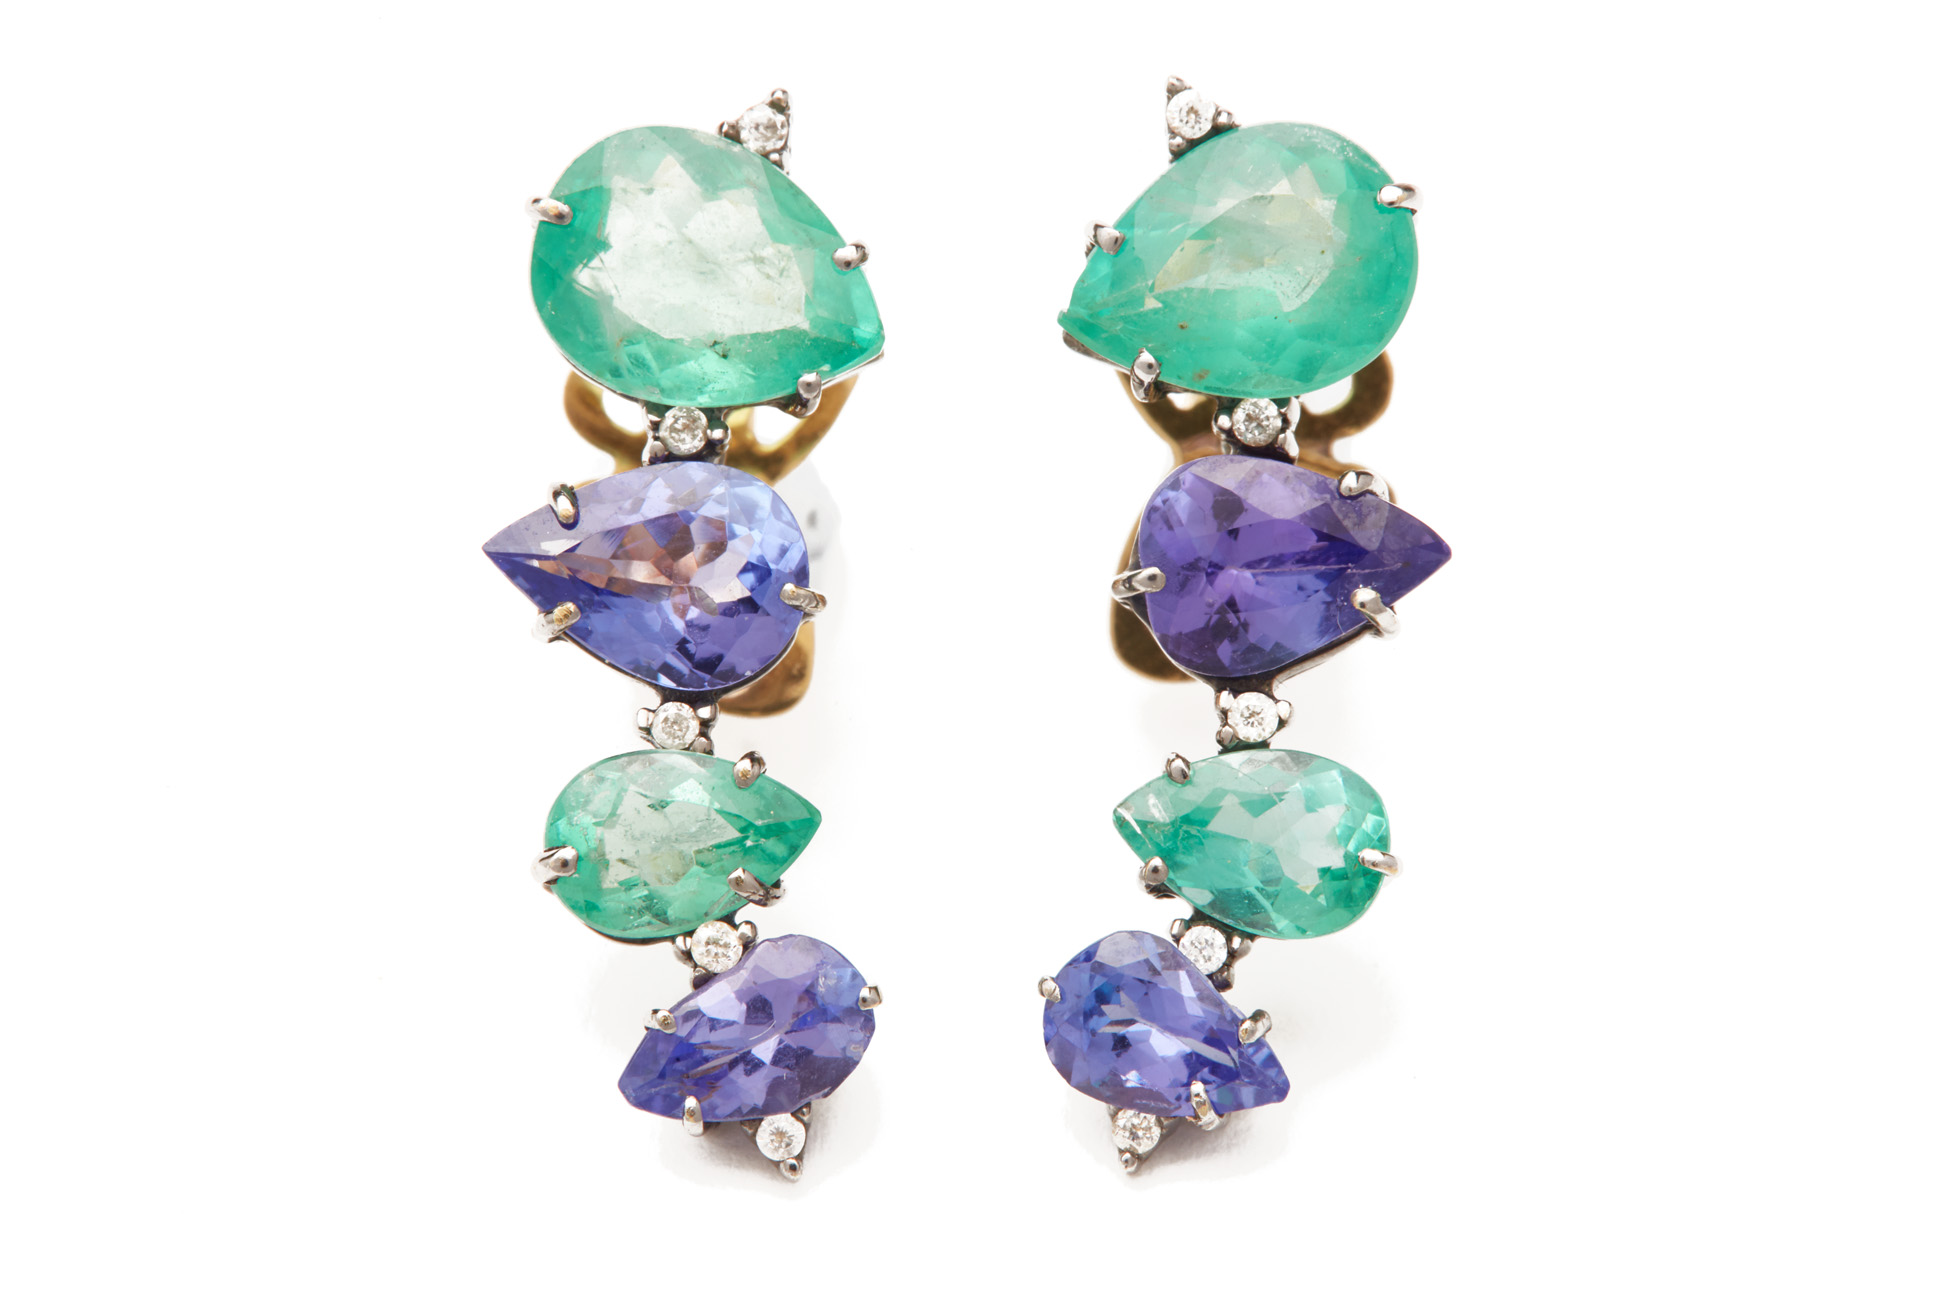 A PAIR OF TANZANITE AND EMERALD EARRINGS